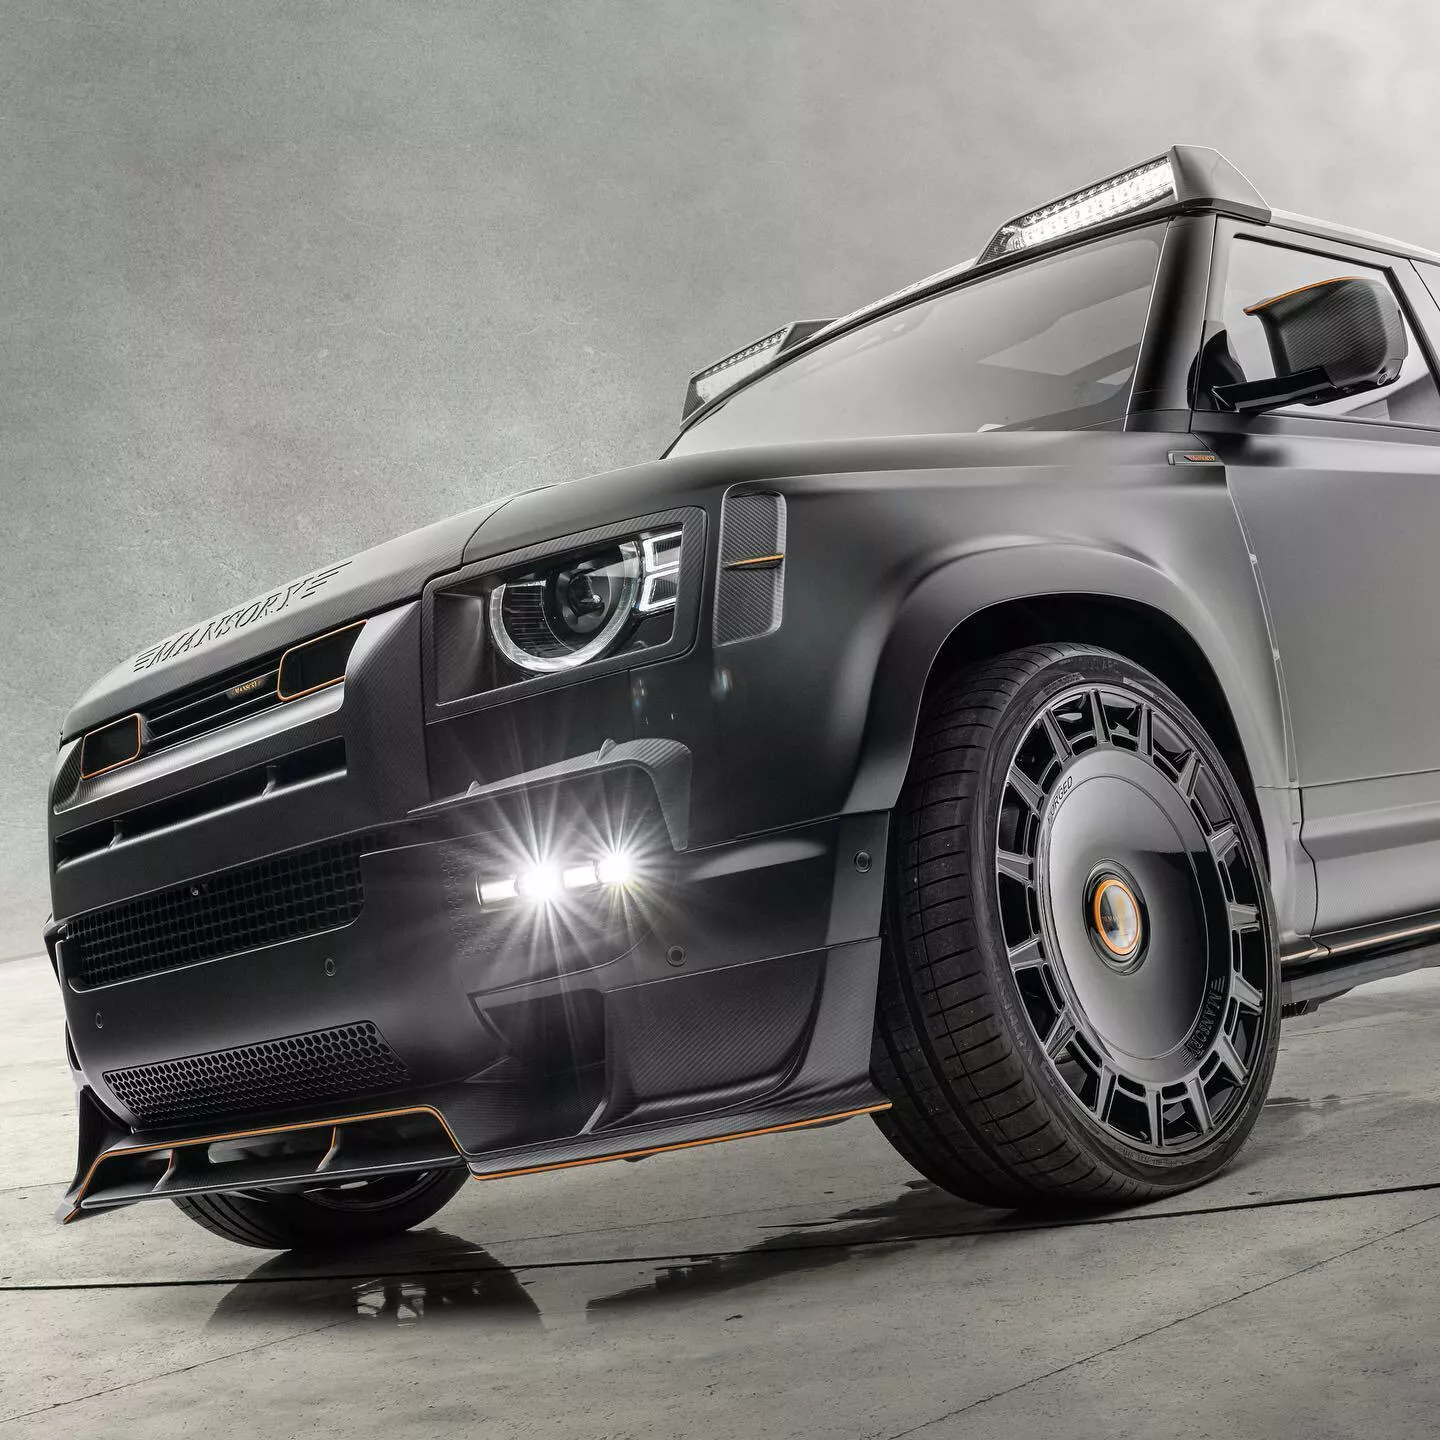 Check out the cool Mansory modified Land Rover Defender mansory-land-rover-defender-6.webp